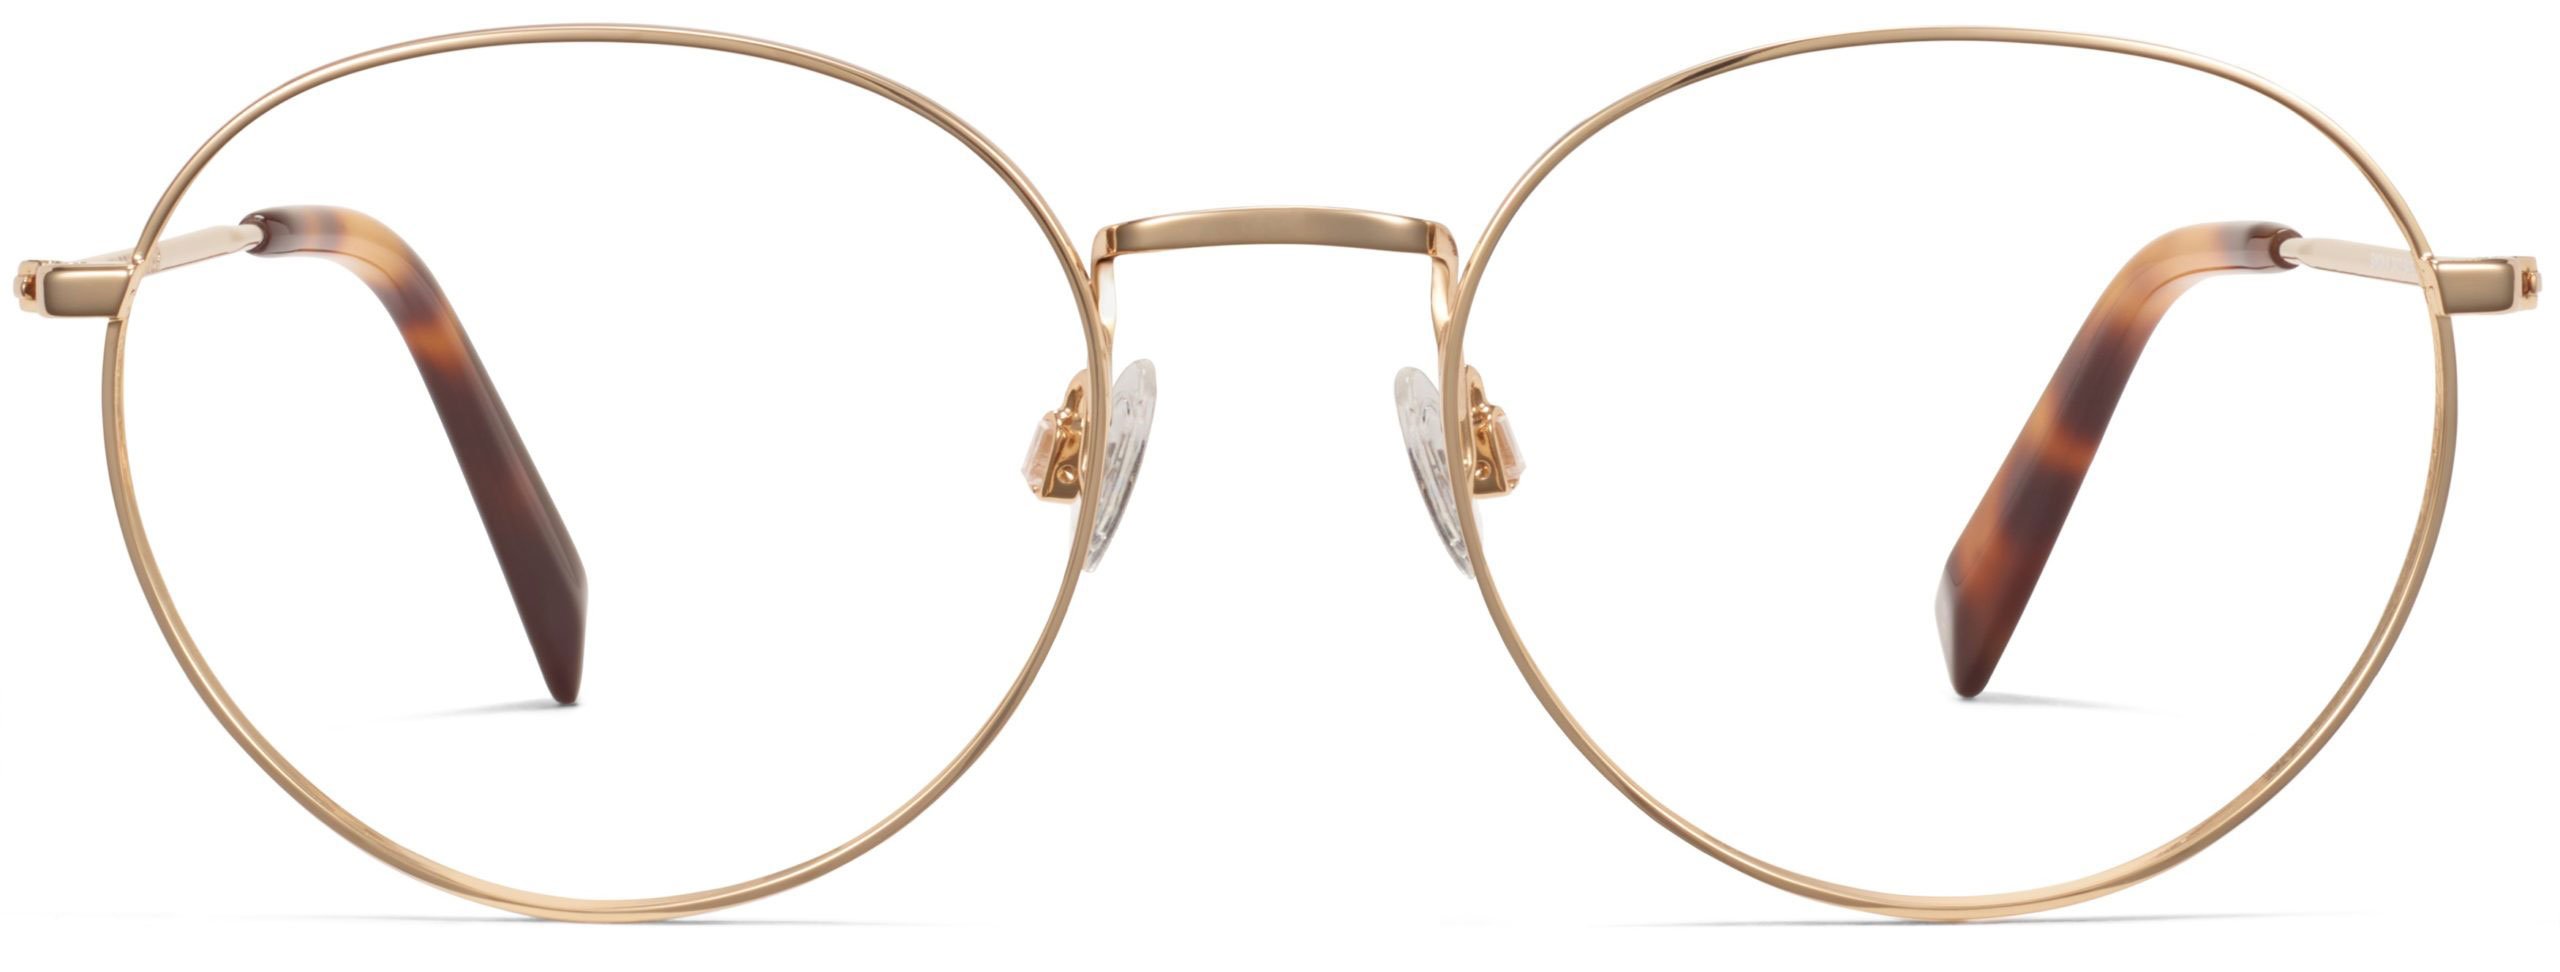 Simon glasses in polished gold